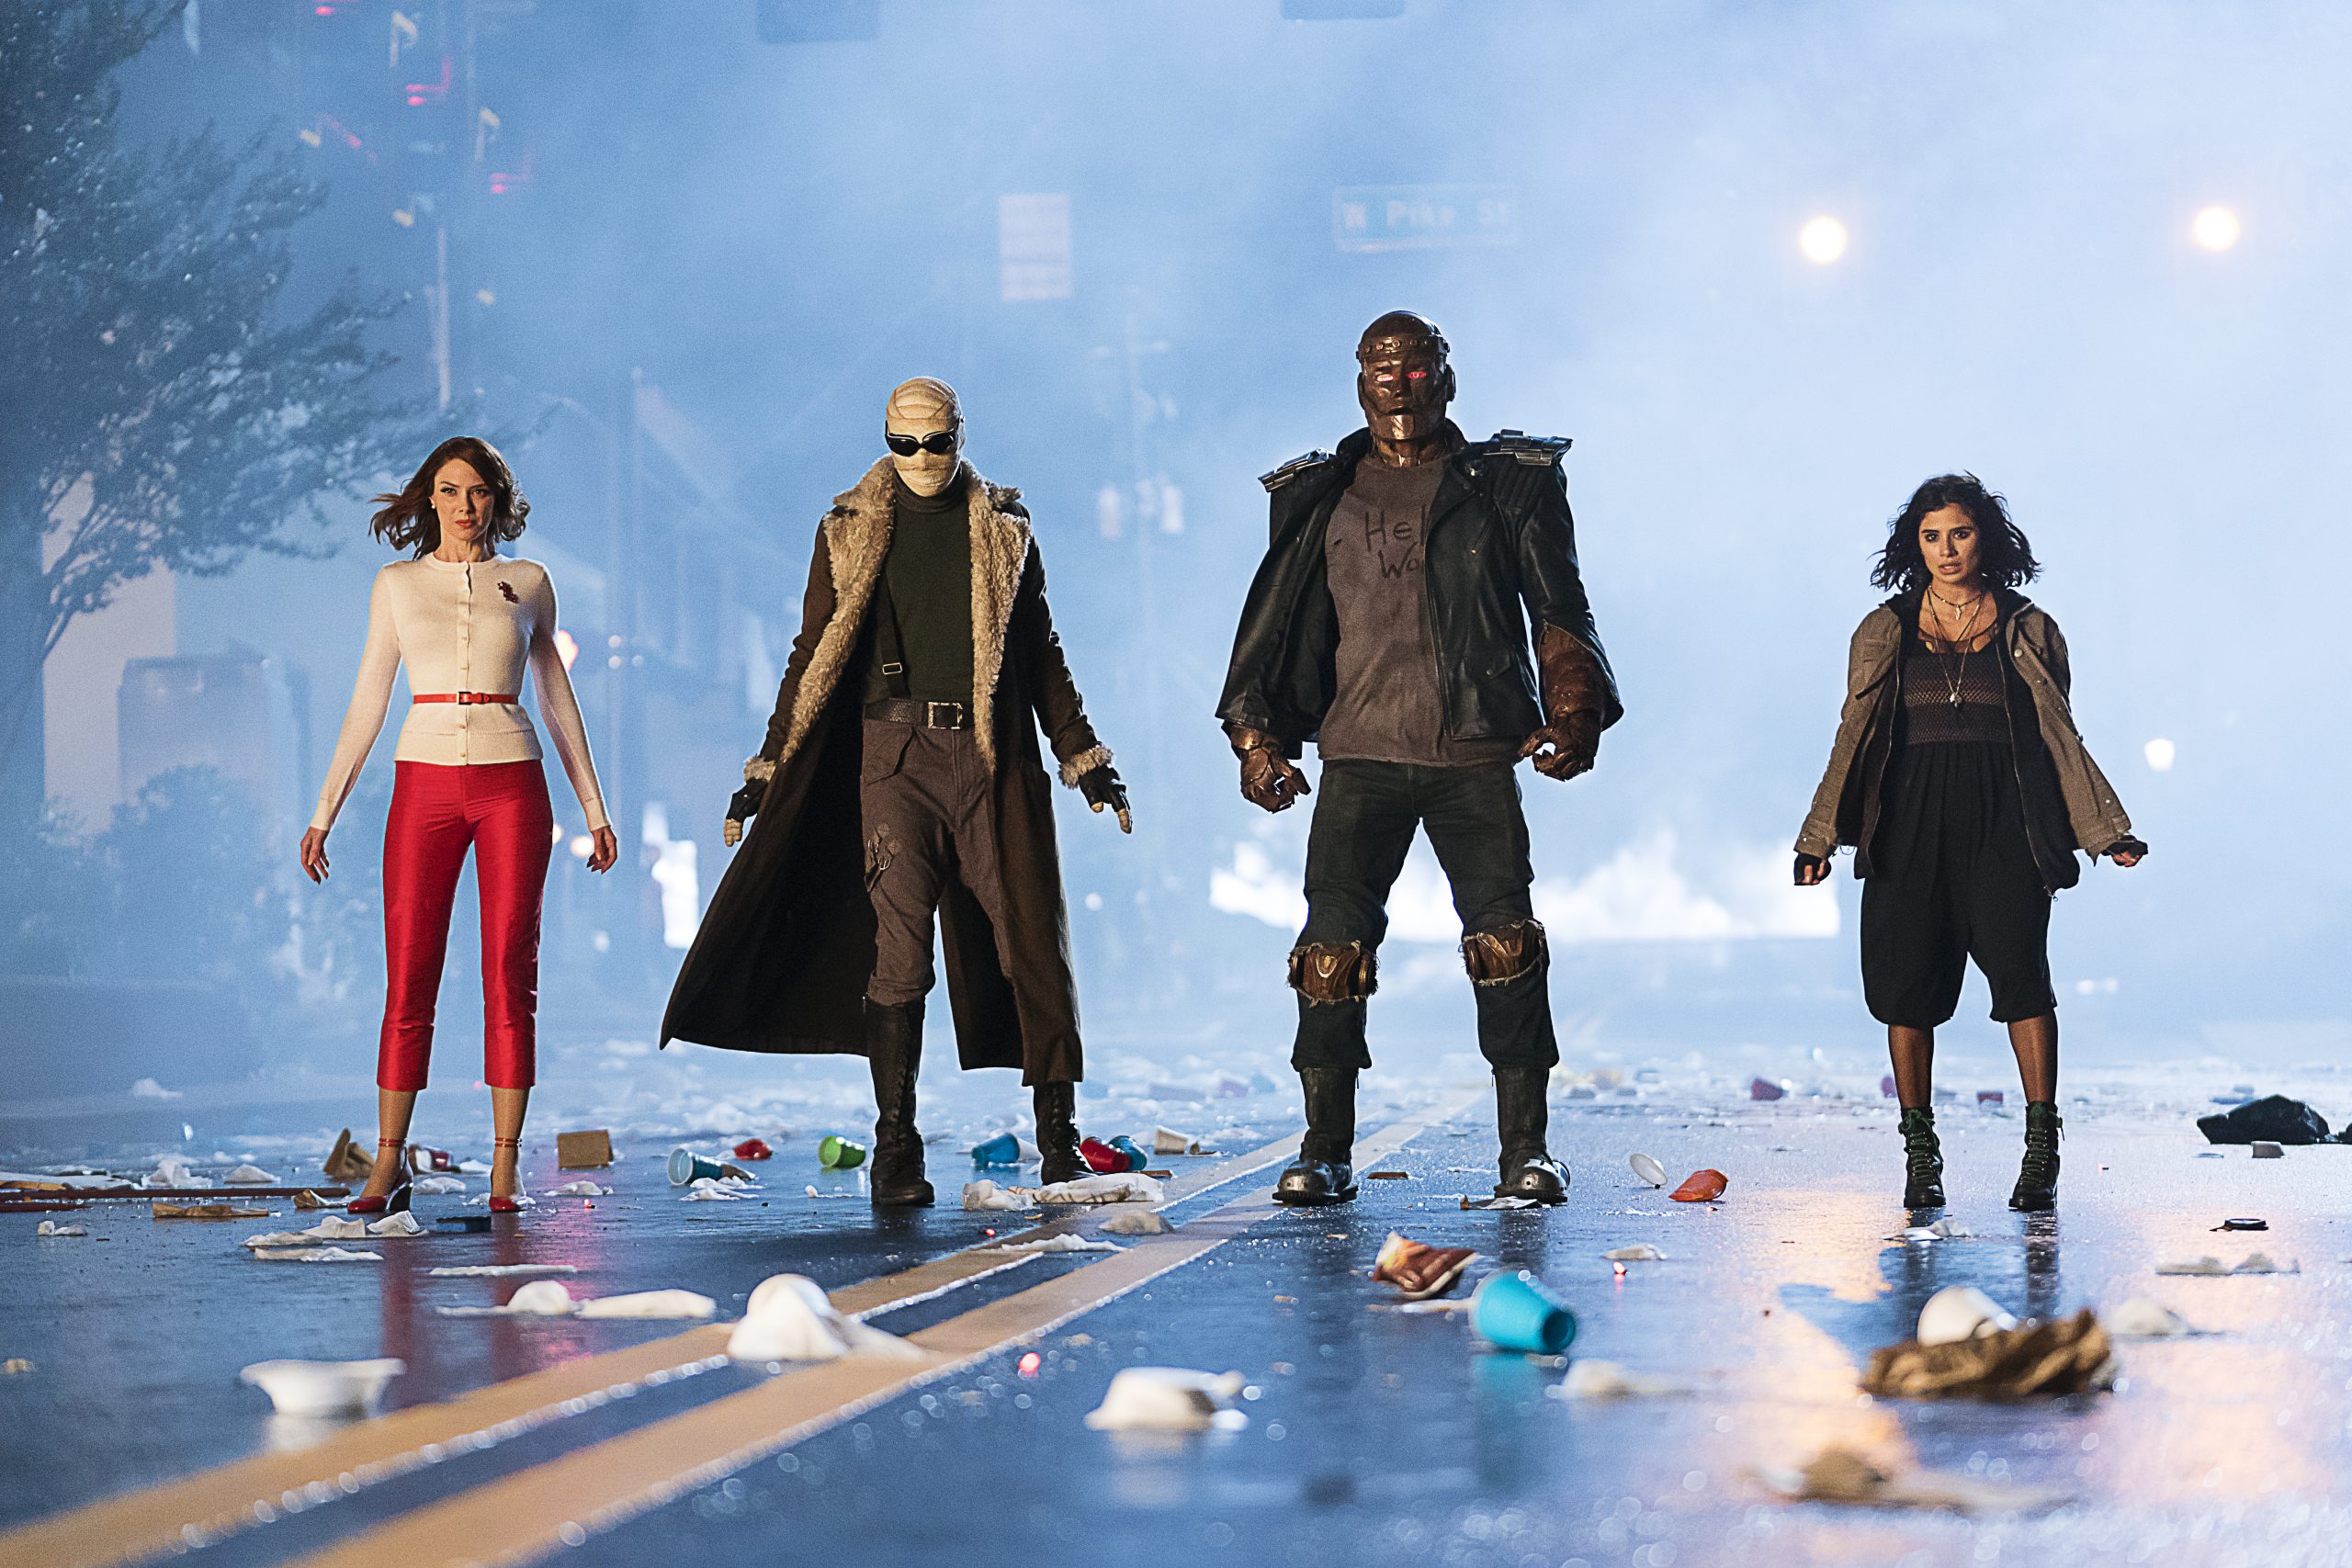 Doom Patrol: HBO Max Reveals Release Date For Season 2 Of The Quirky DC Series